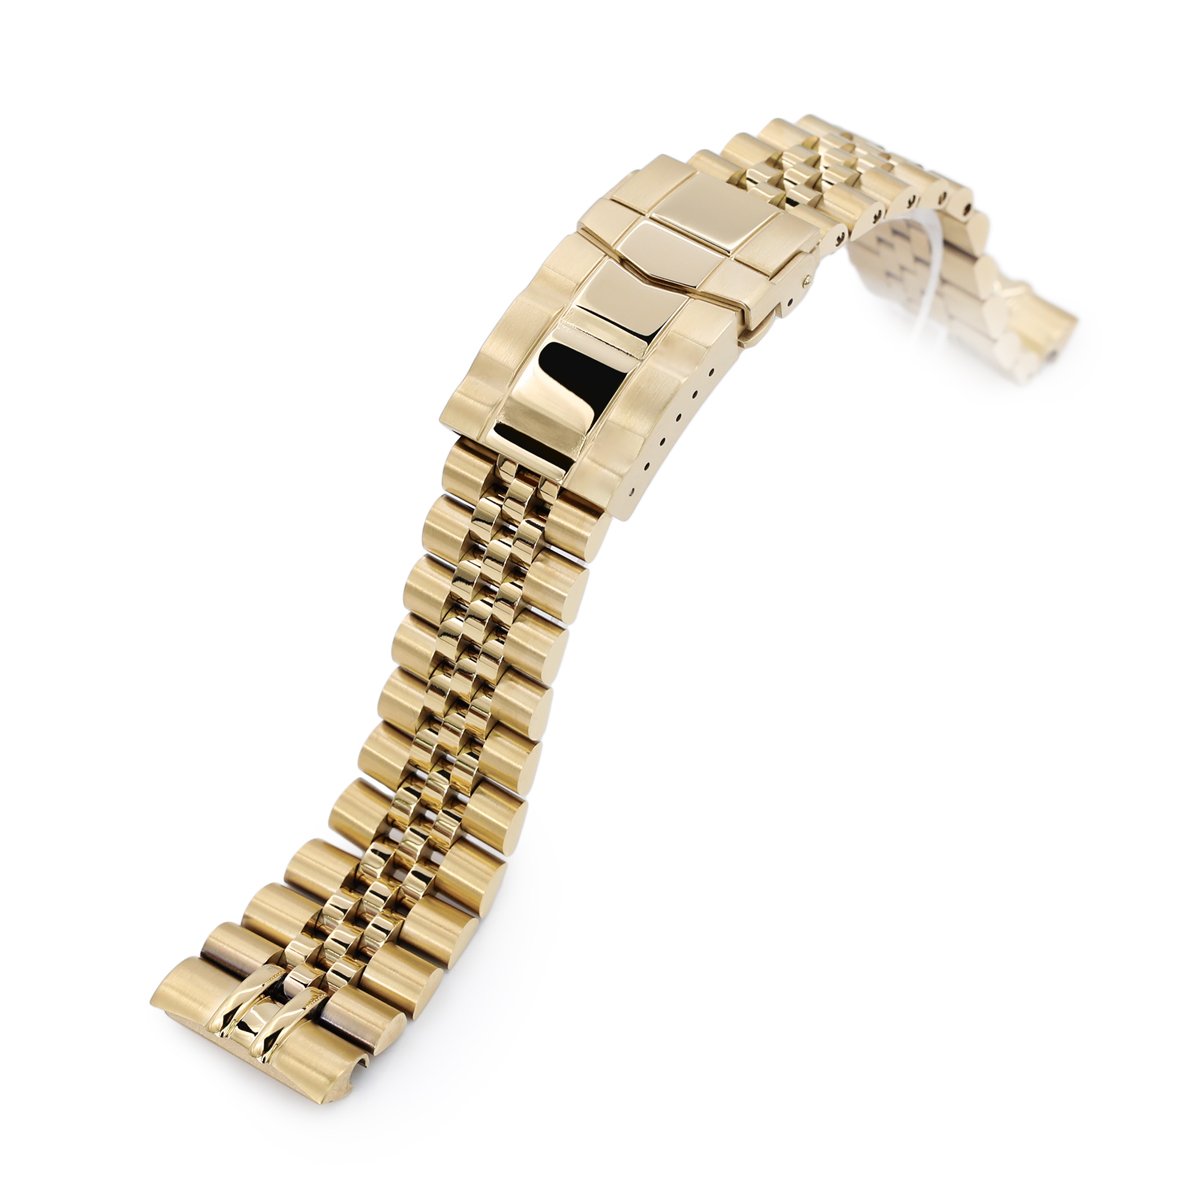 22mm Super-J Louis 316L Stainless Steel Watch Bracelet for Seiko Gold Turtle SRPC44 SUB Clasp full IP Gold Strapcode Watch Bands